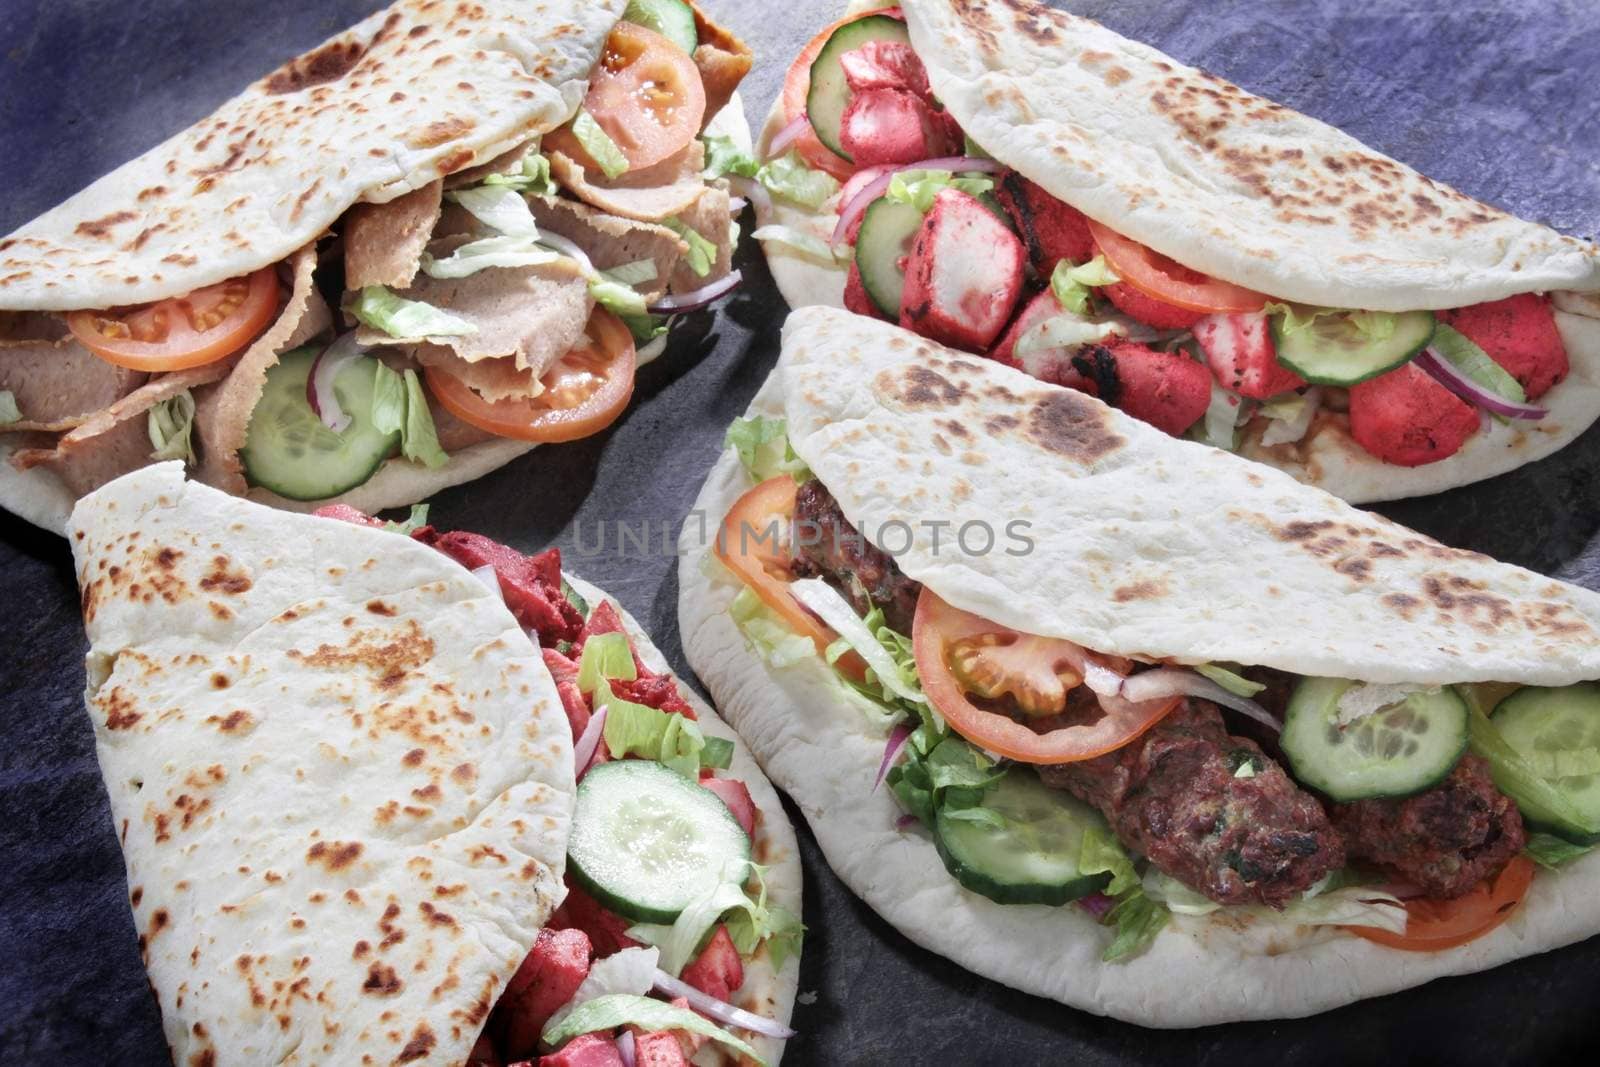 indian donner wrap by neil_langan